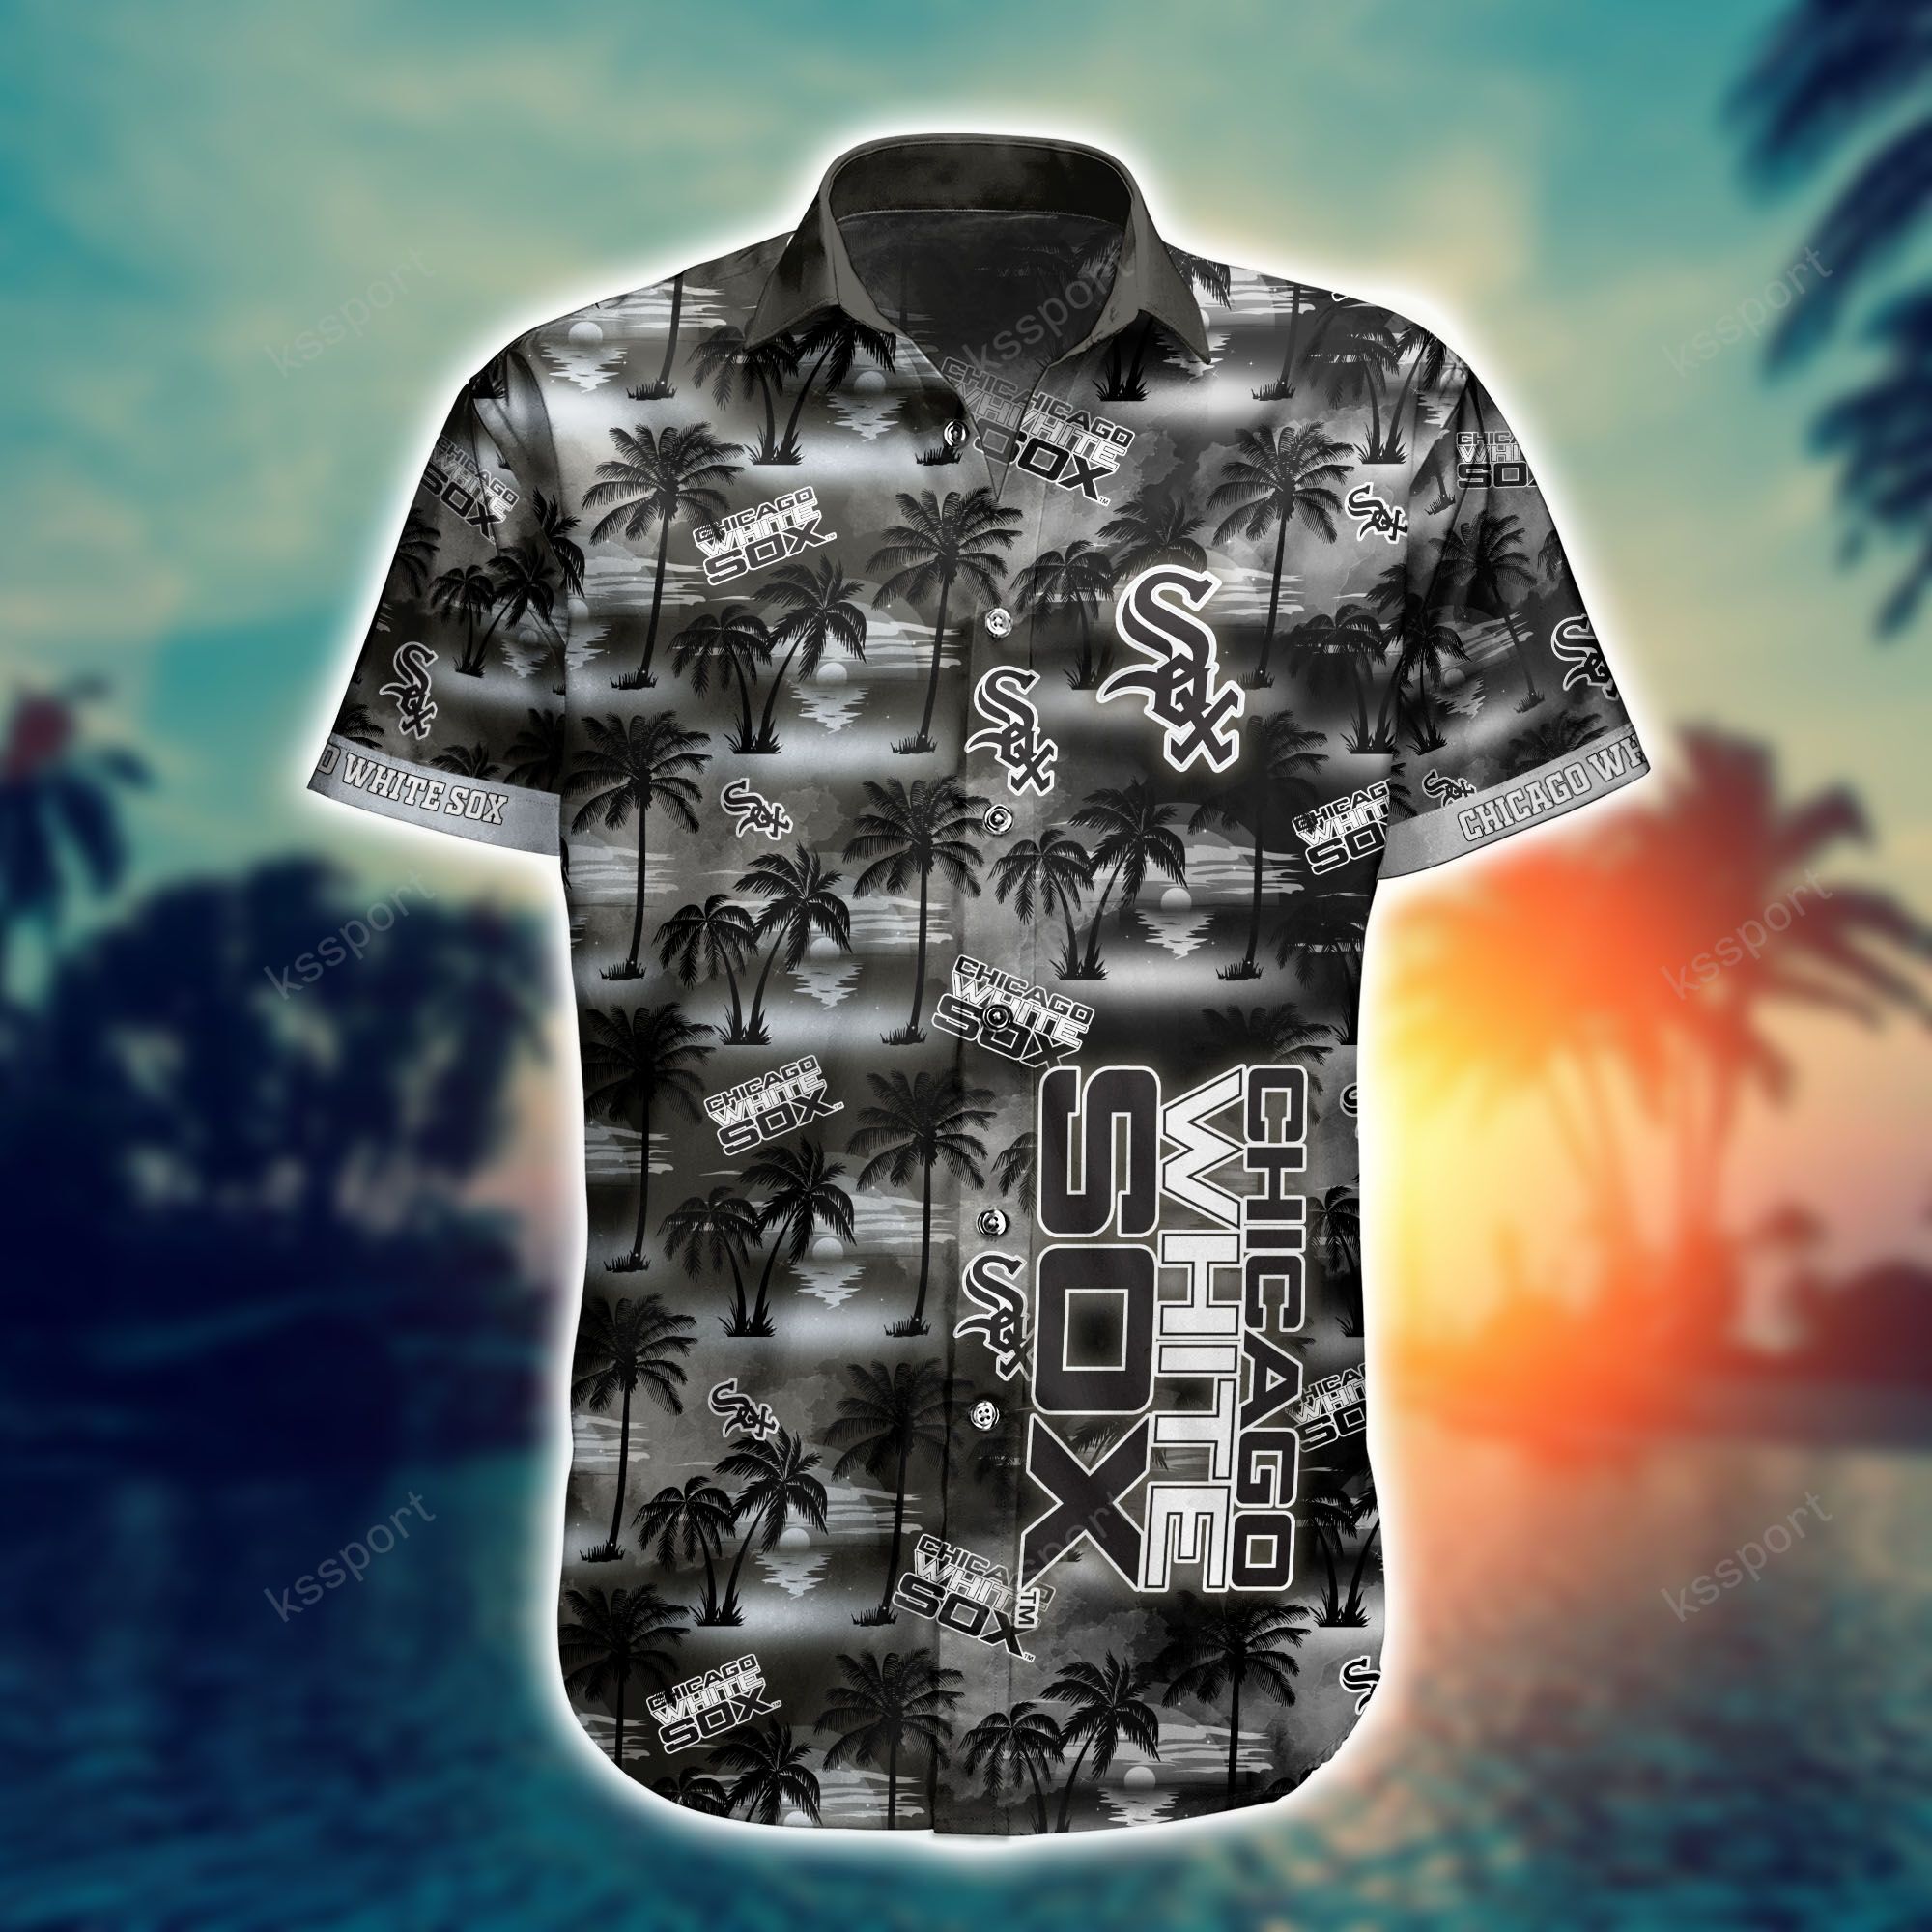 Top cool Hawaiian shirt 2022 - Make sure you get yours today before they run out! 220